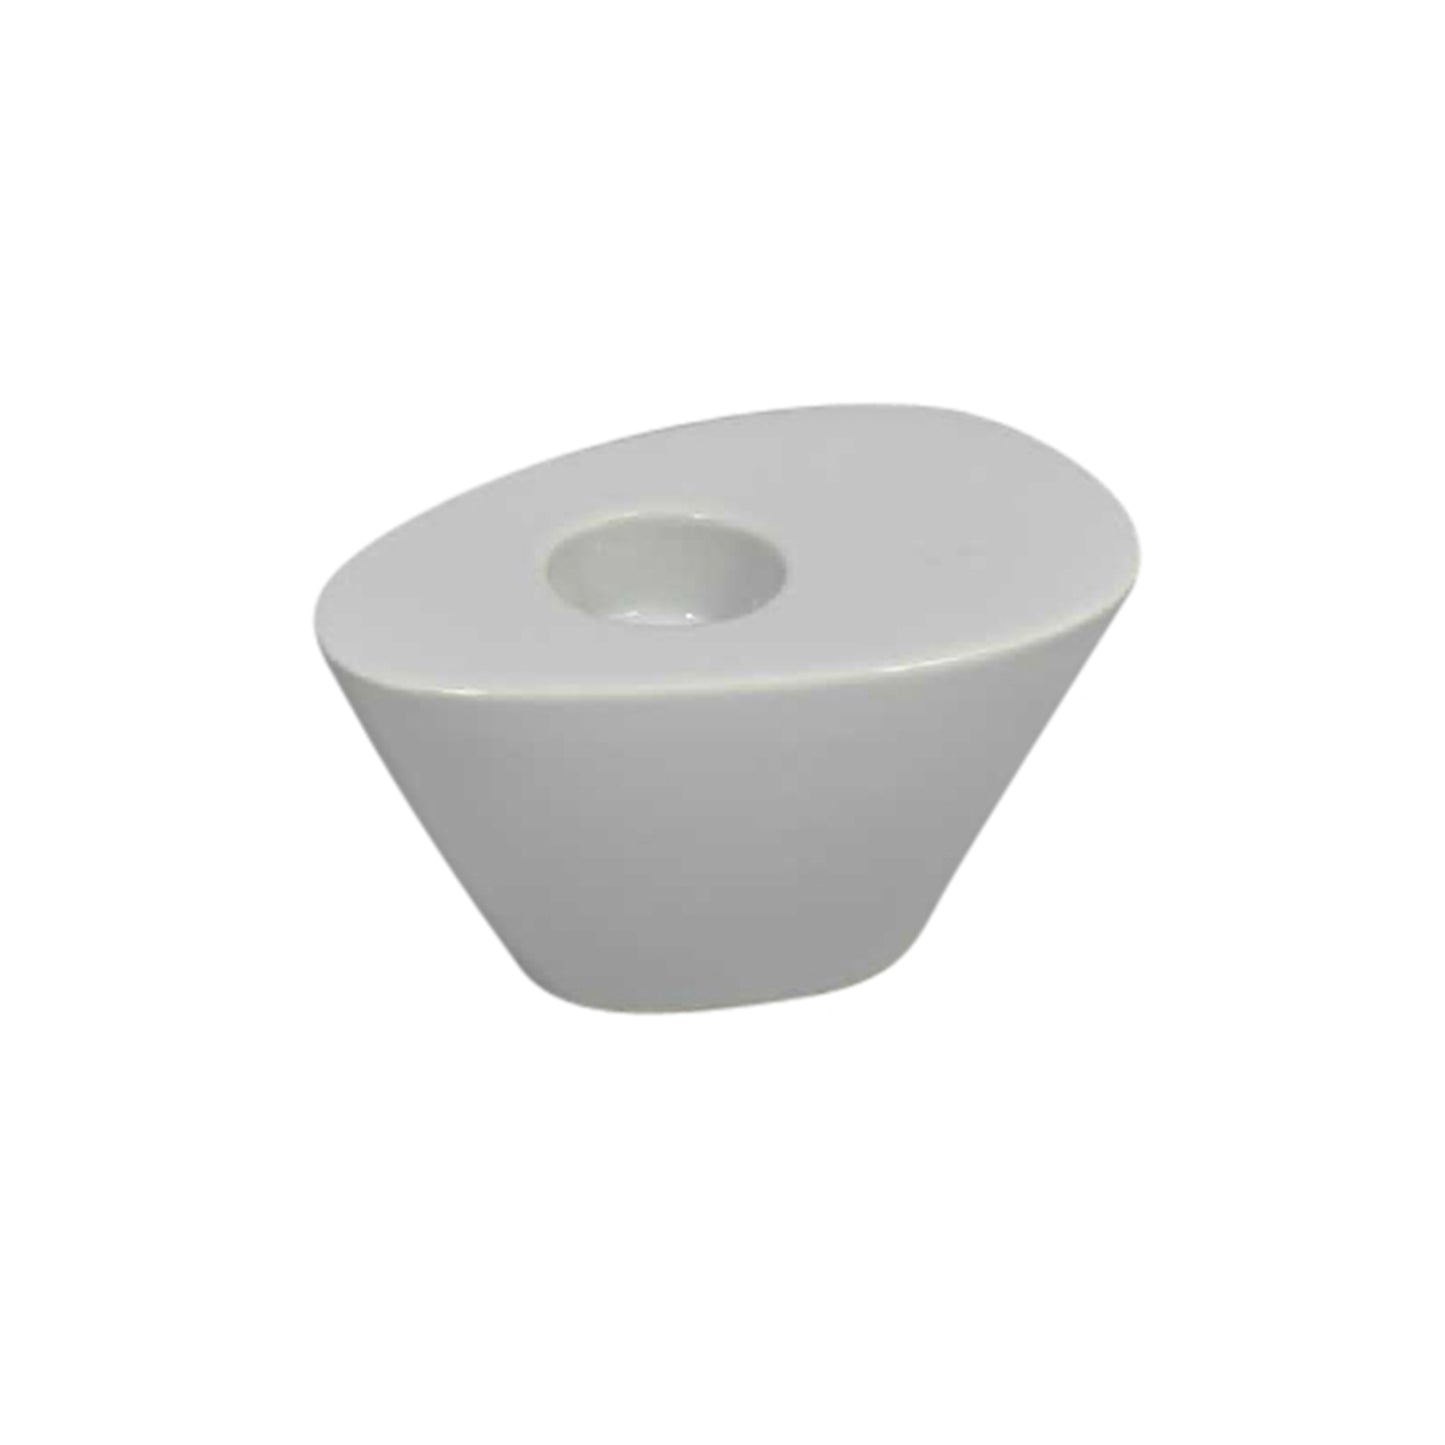 WHITE WEDGE CANDLE HOLDER 6.25"